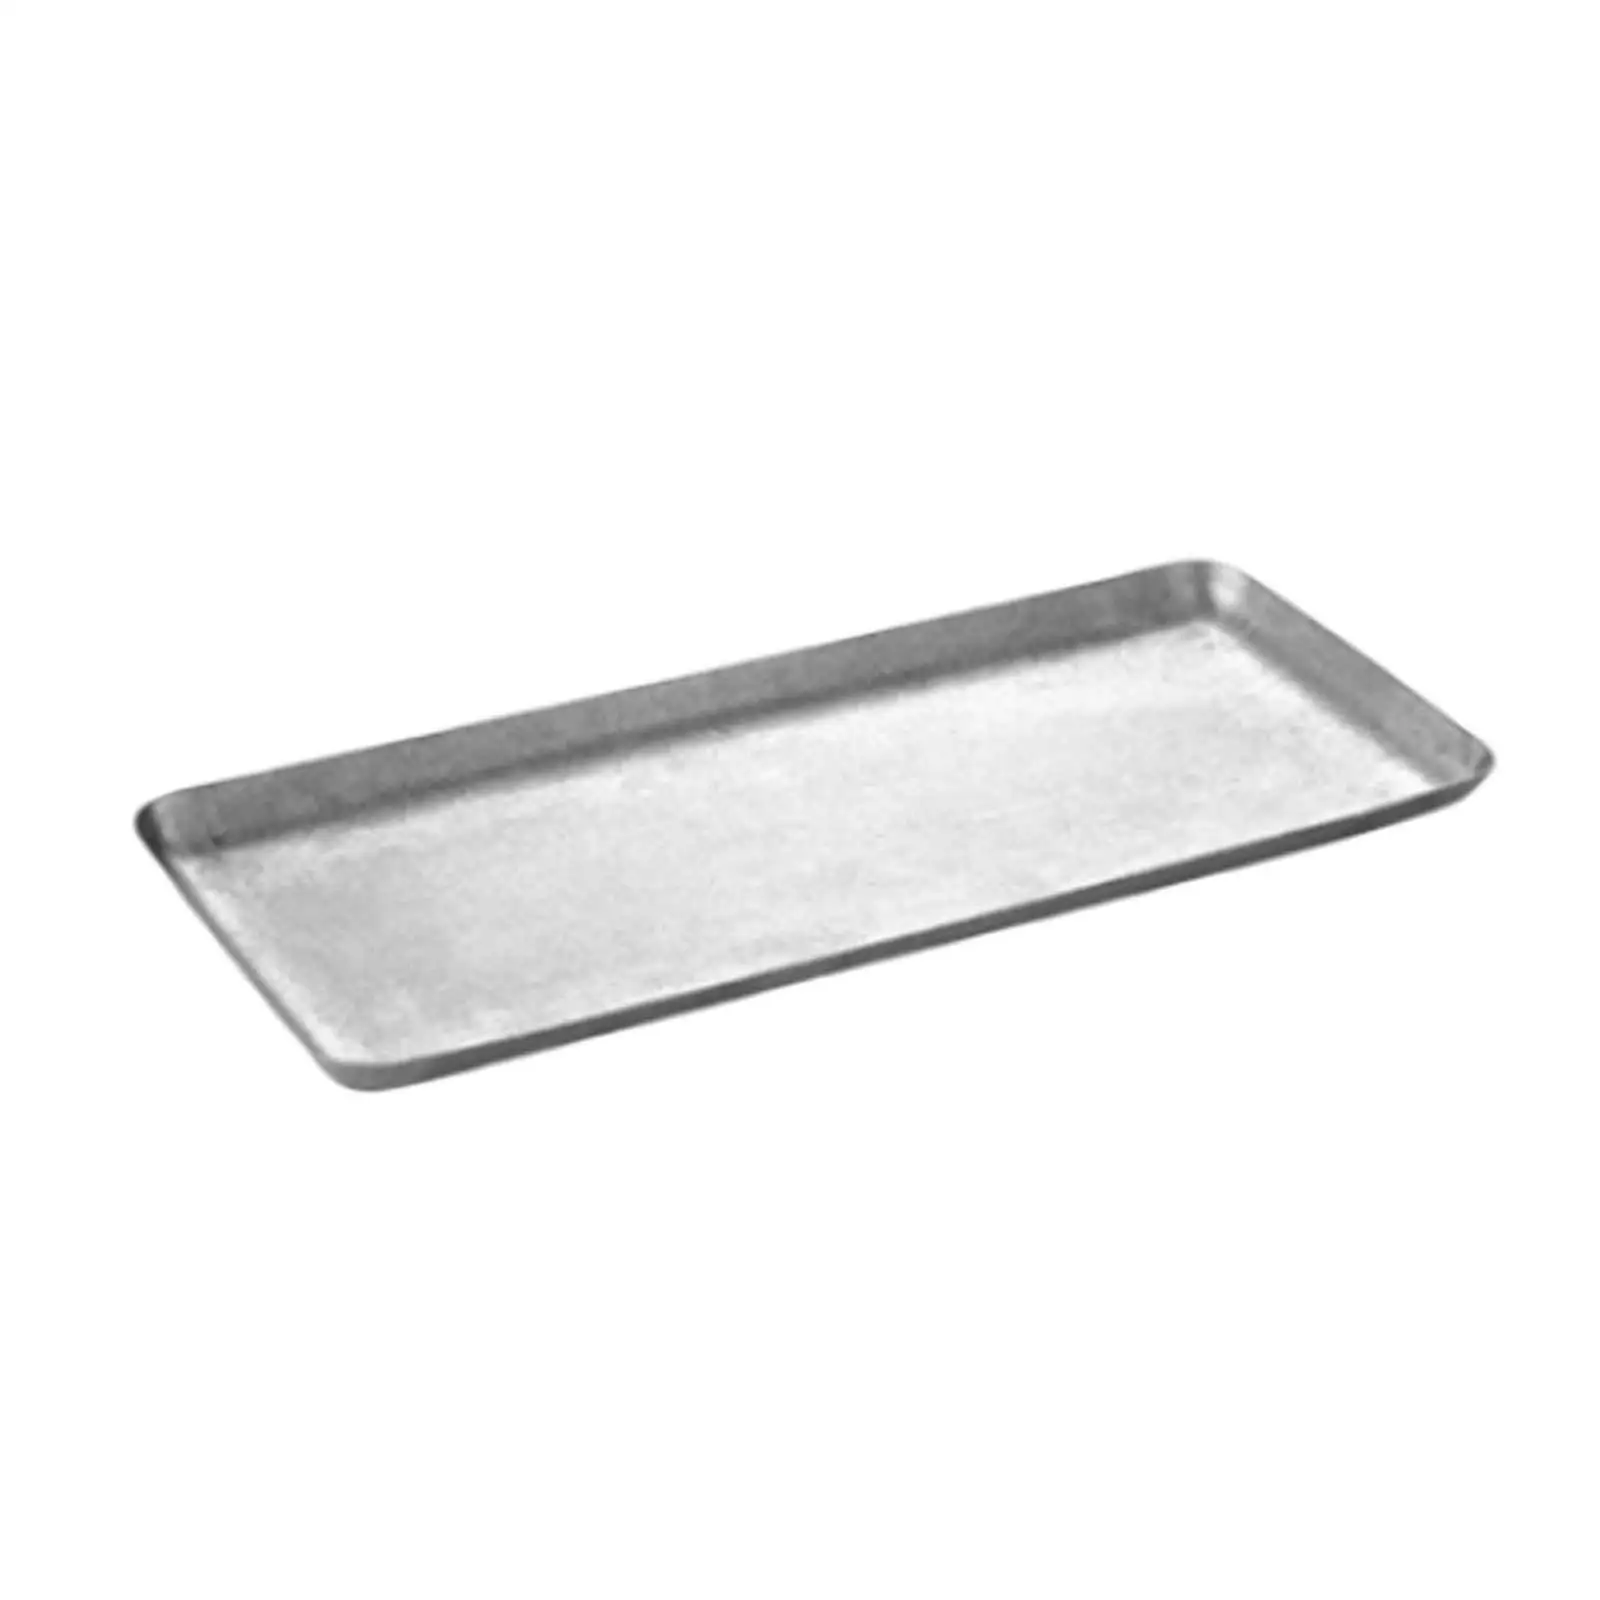 Stainless Steel Serving Tray Rectangular Tray for Restaurant Table Farmhouse